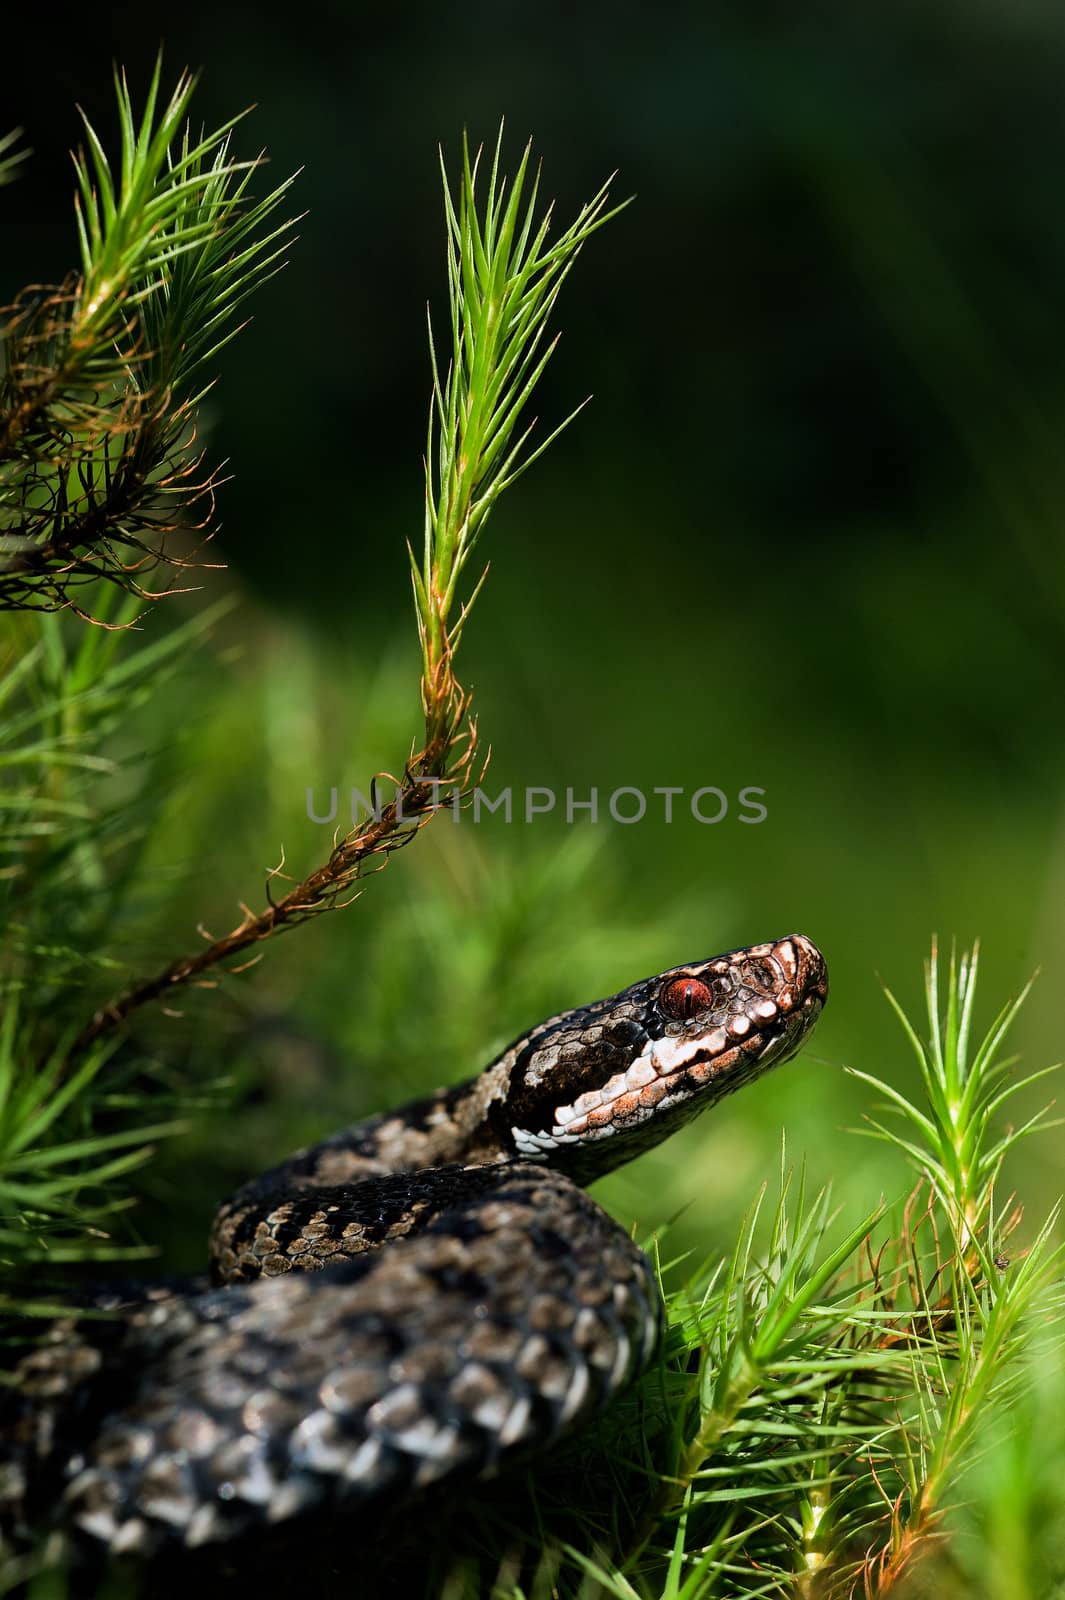 European viper. Common Viper prepares for a throw. Vipera berus, the common European adder or common European viper, is a venomous viper species that is extremely widespread.  